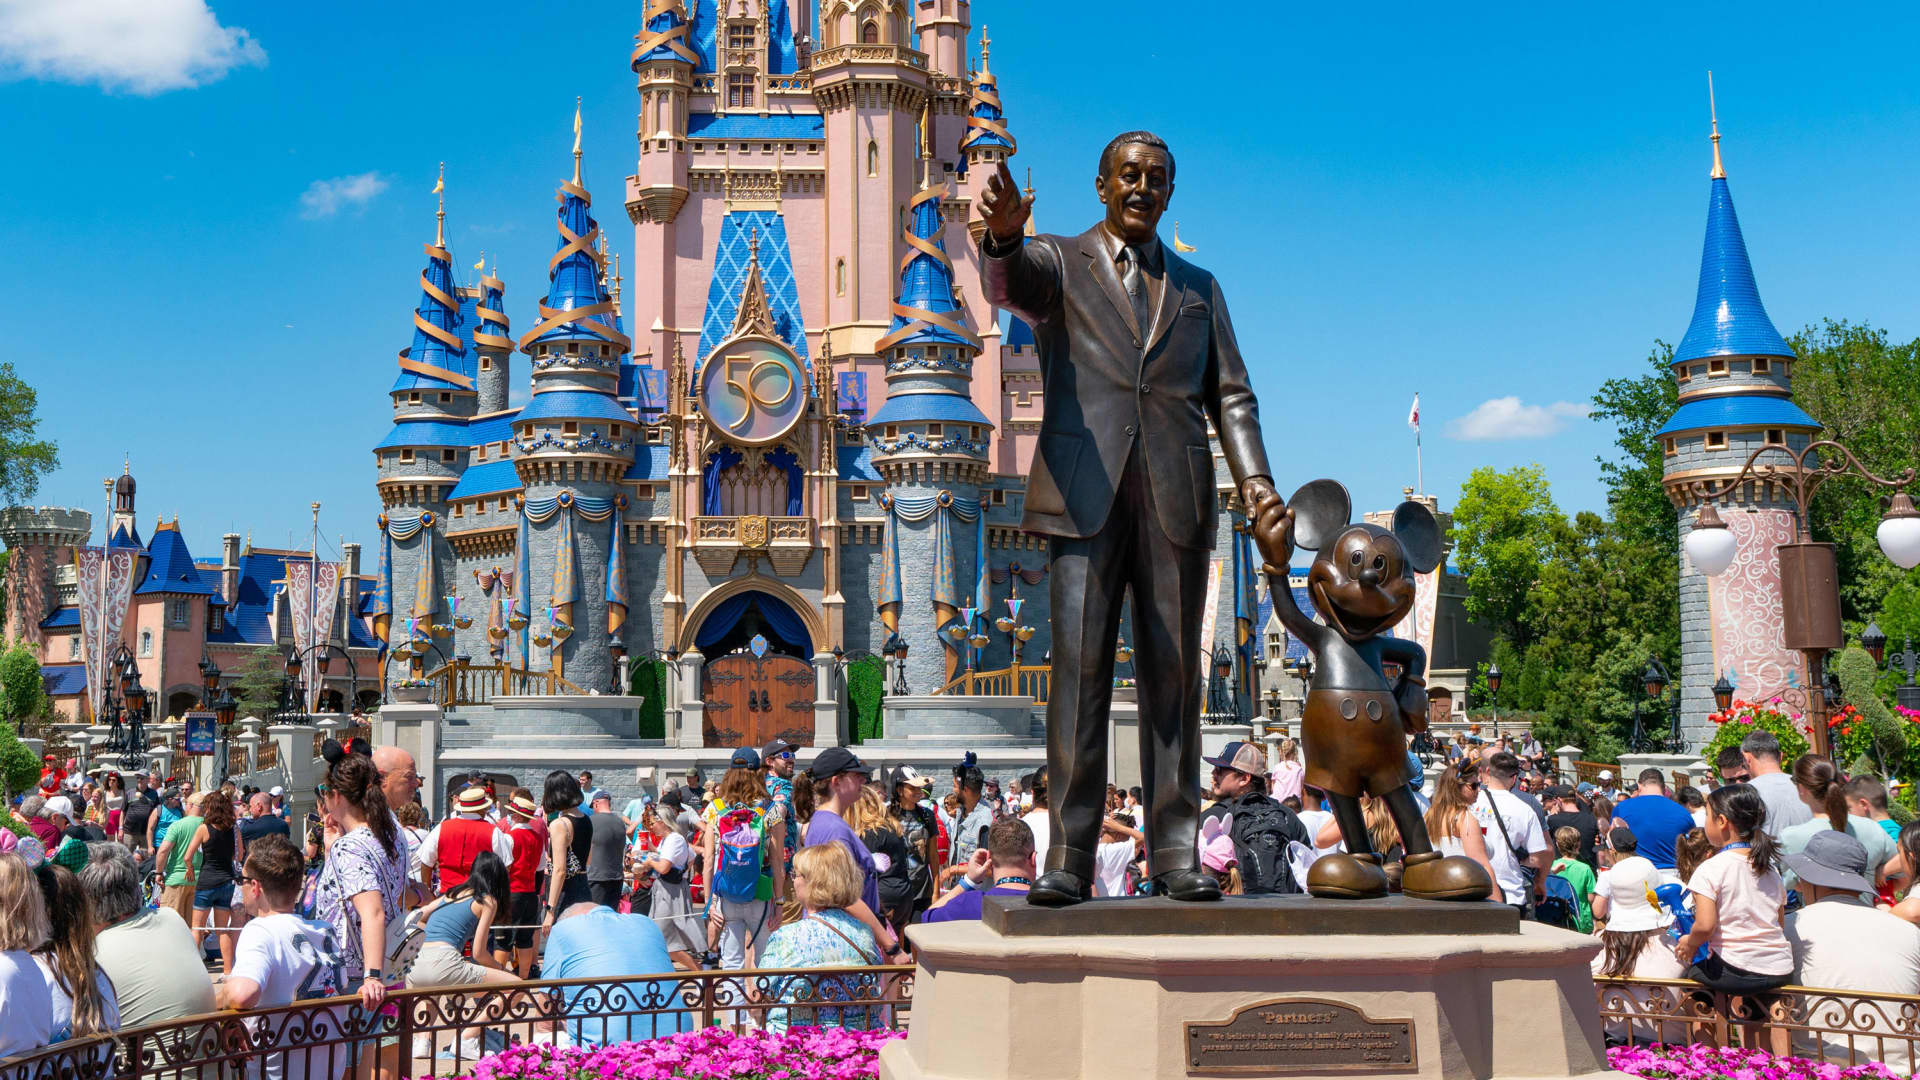 Disney plans to speed up and expand investment in parks and cruises business